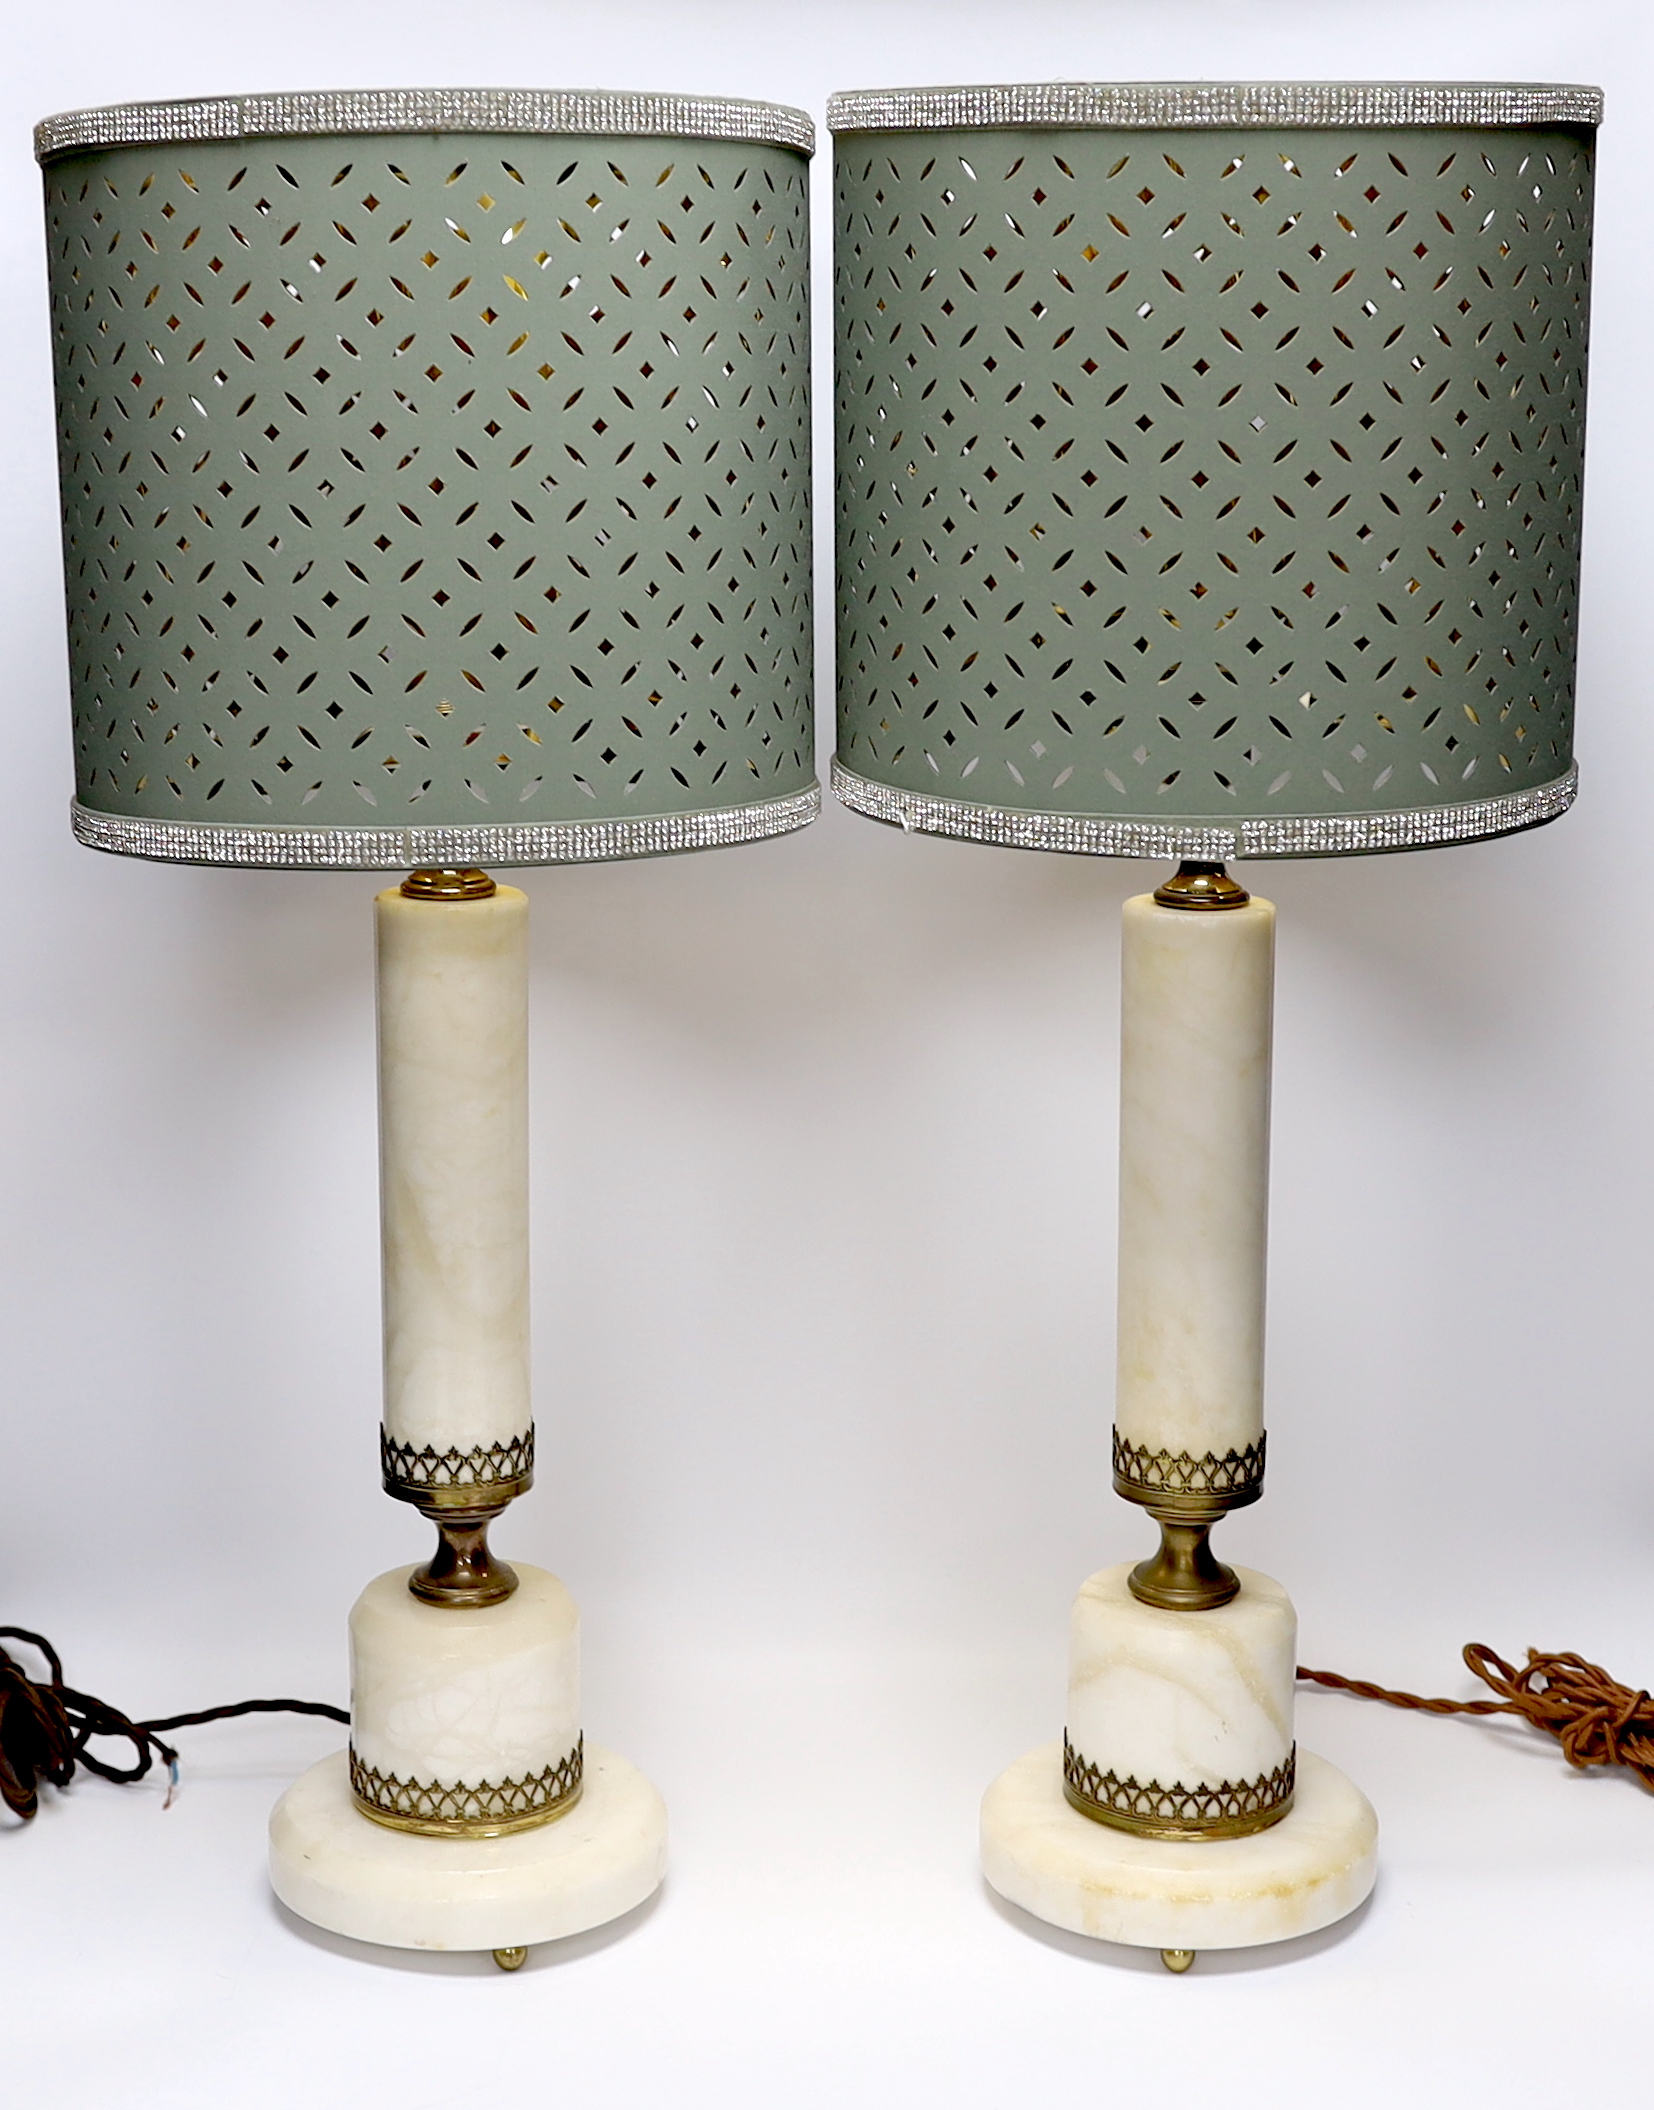 A pair of white marble column table lamps with gilt metal mounts and shades, 61cm high overall